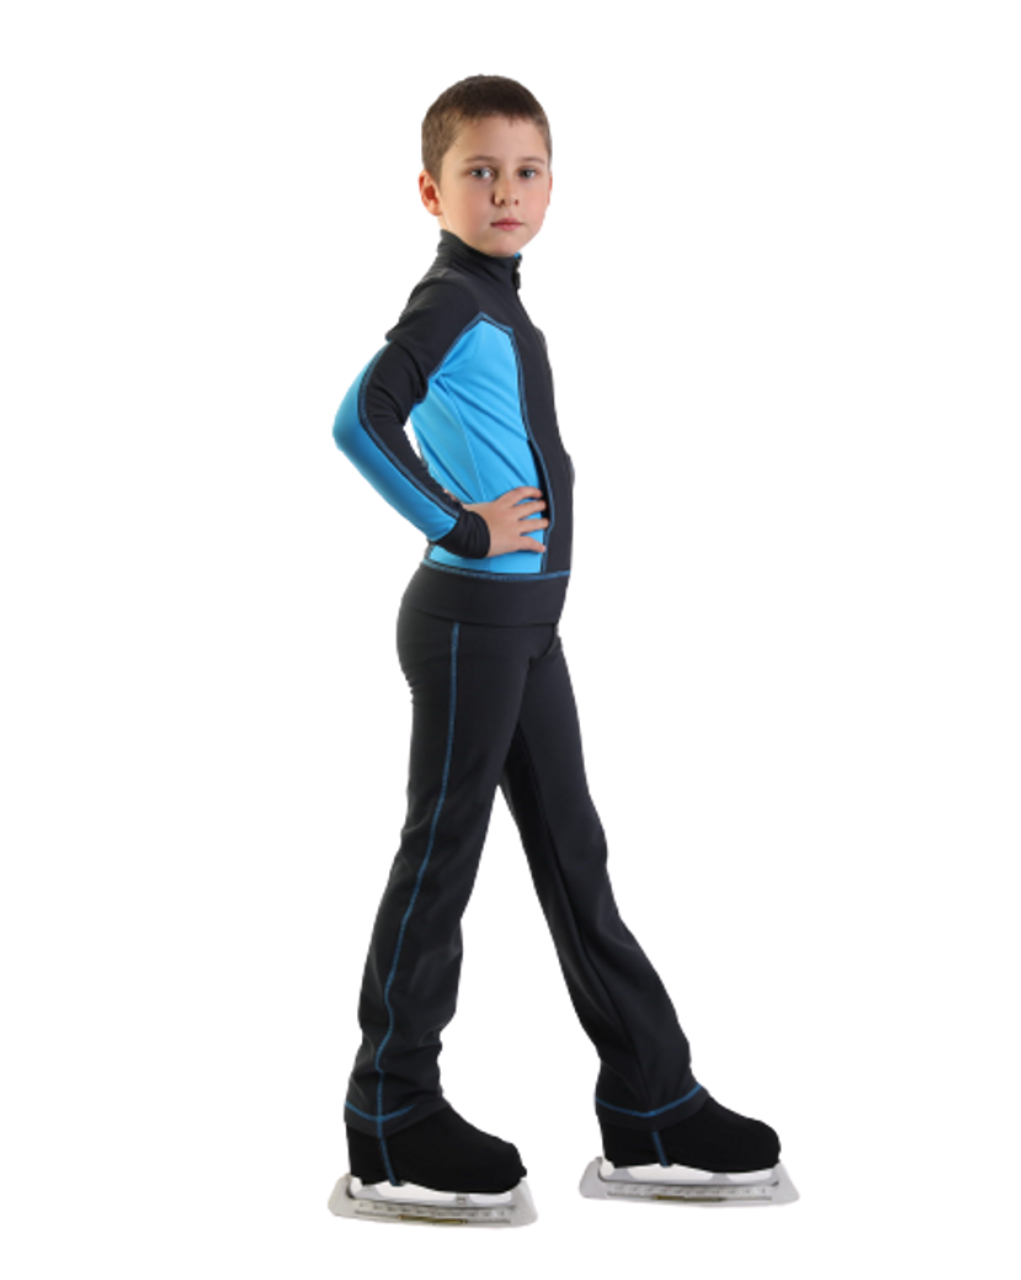 IceDress - Thermal Figure Skating Outfit - Squares (Dark Gray with Blue)  for Boys